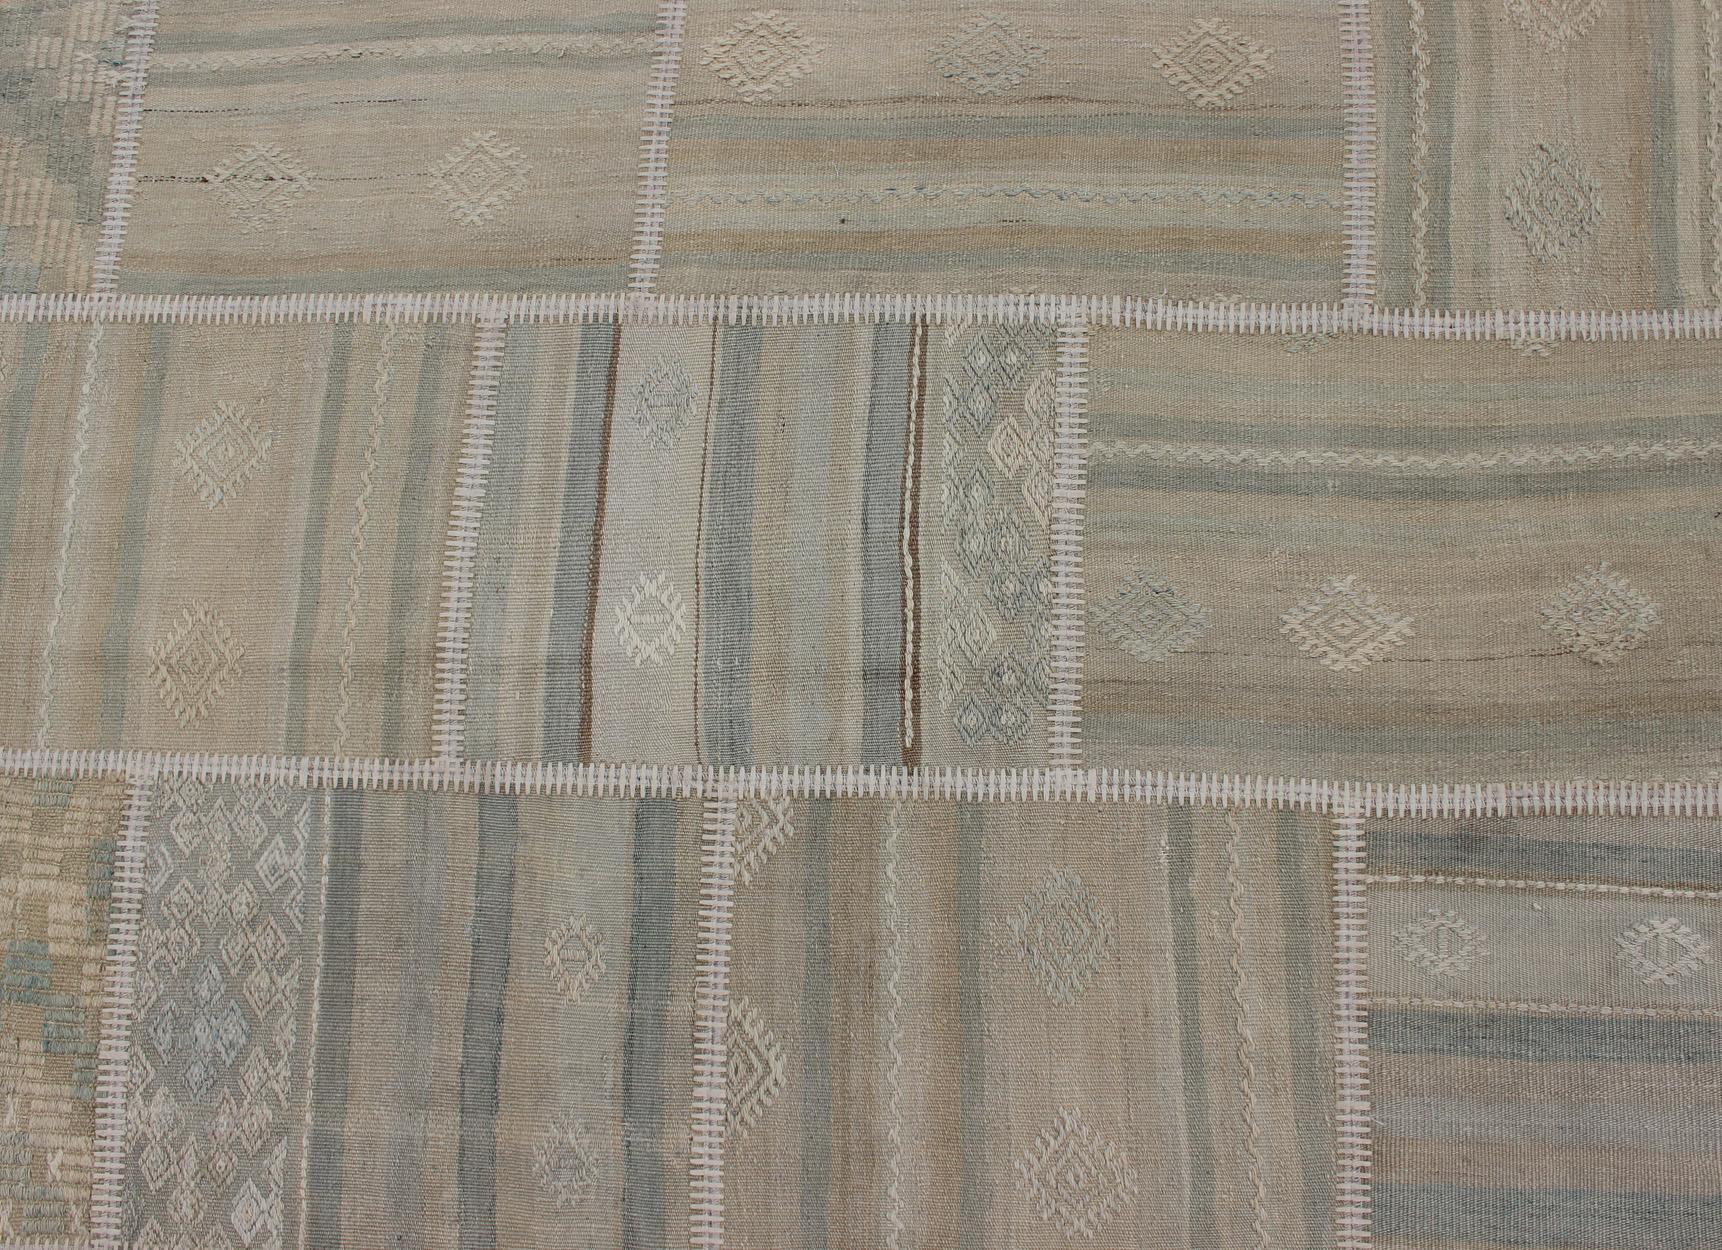 20th Century Large Turkish Kilim in Tan, Blue, Taupe, Light Green & Neutral Colors For Sale